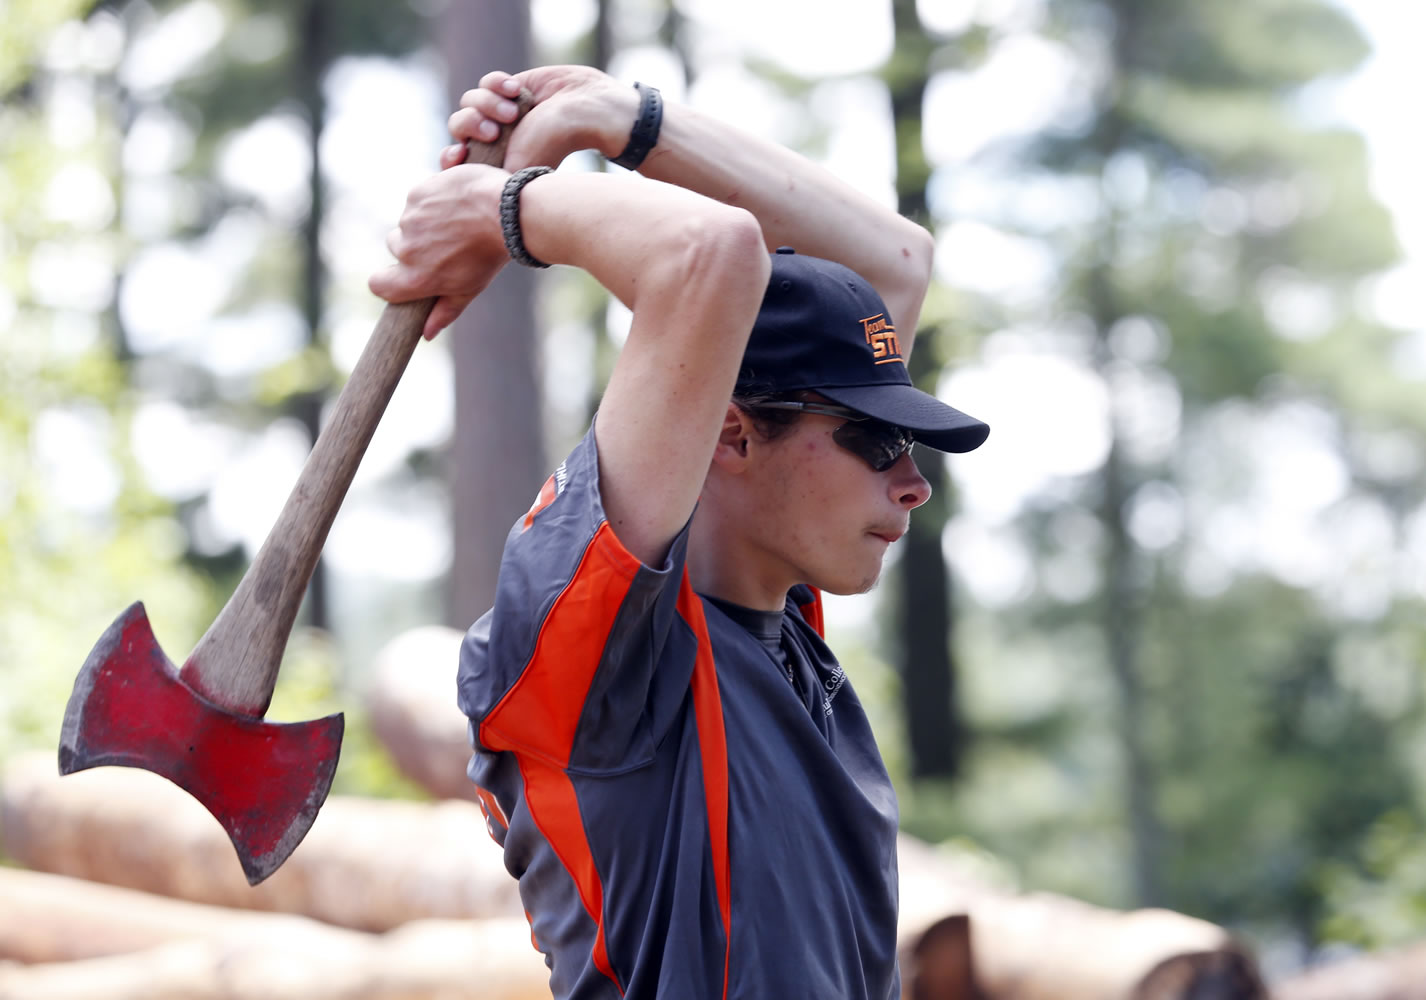 Frederick Wright of Burrillville, R.I., takes aim in the ax throw event at the Adirondack Woodsmen's School at Paul Smith's College in Paul Smiths, N.Y.